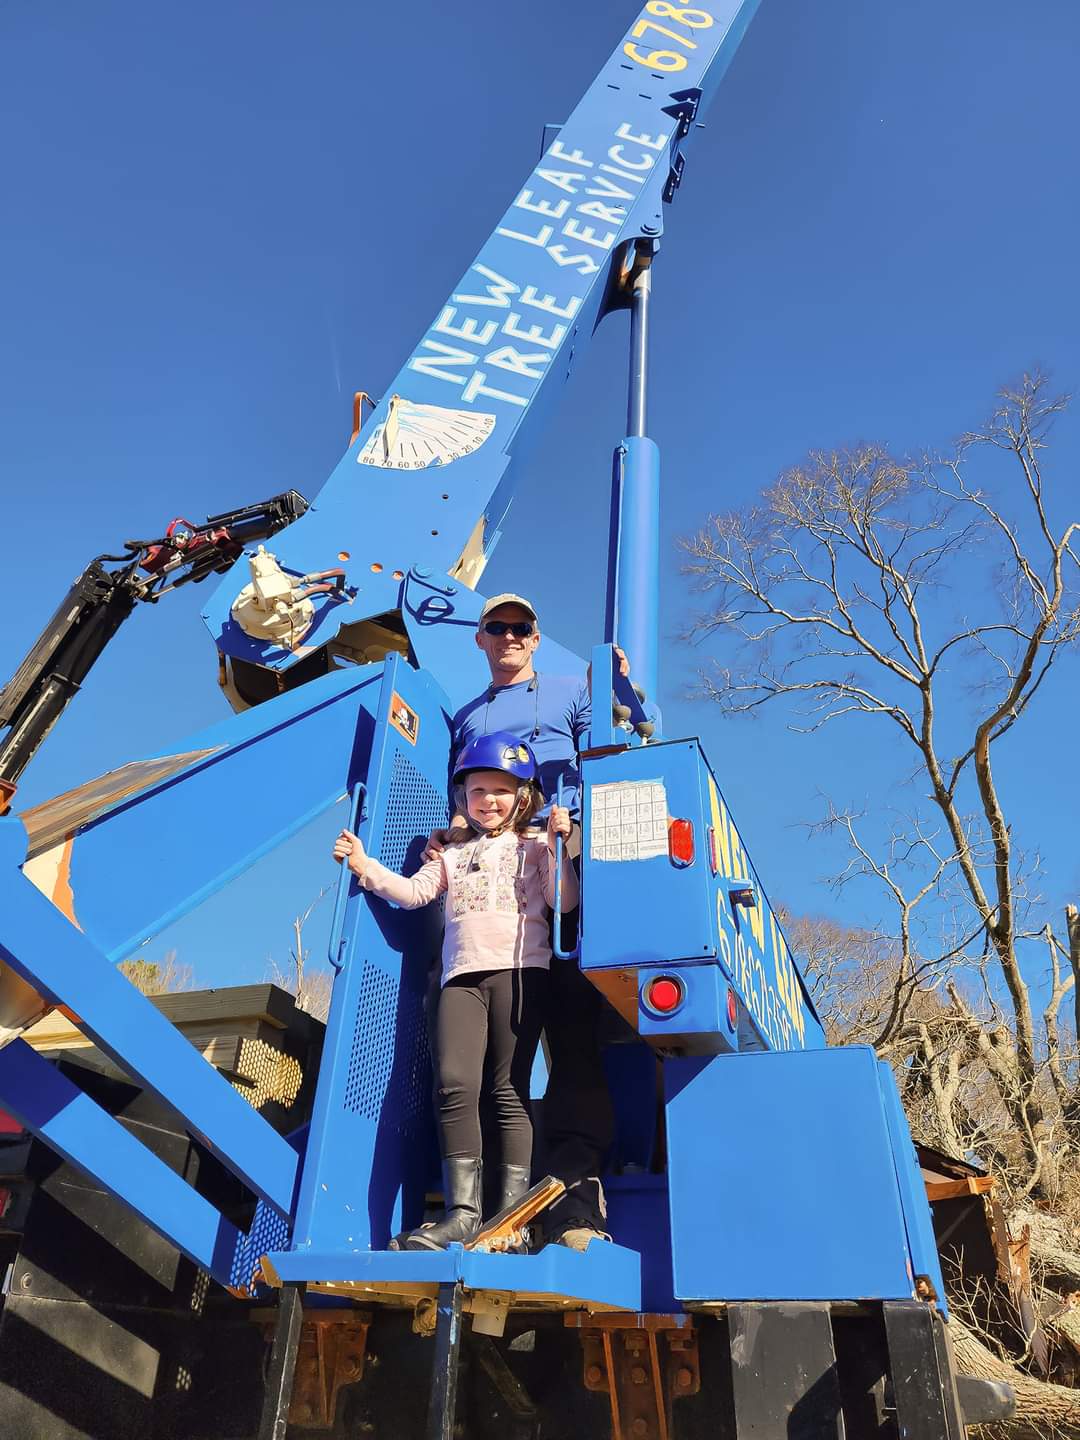 Owner Michael with his daughter standing on a crane